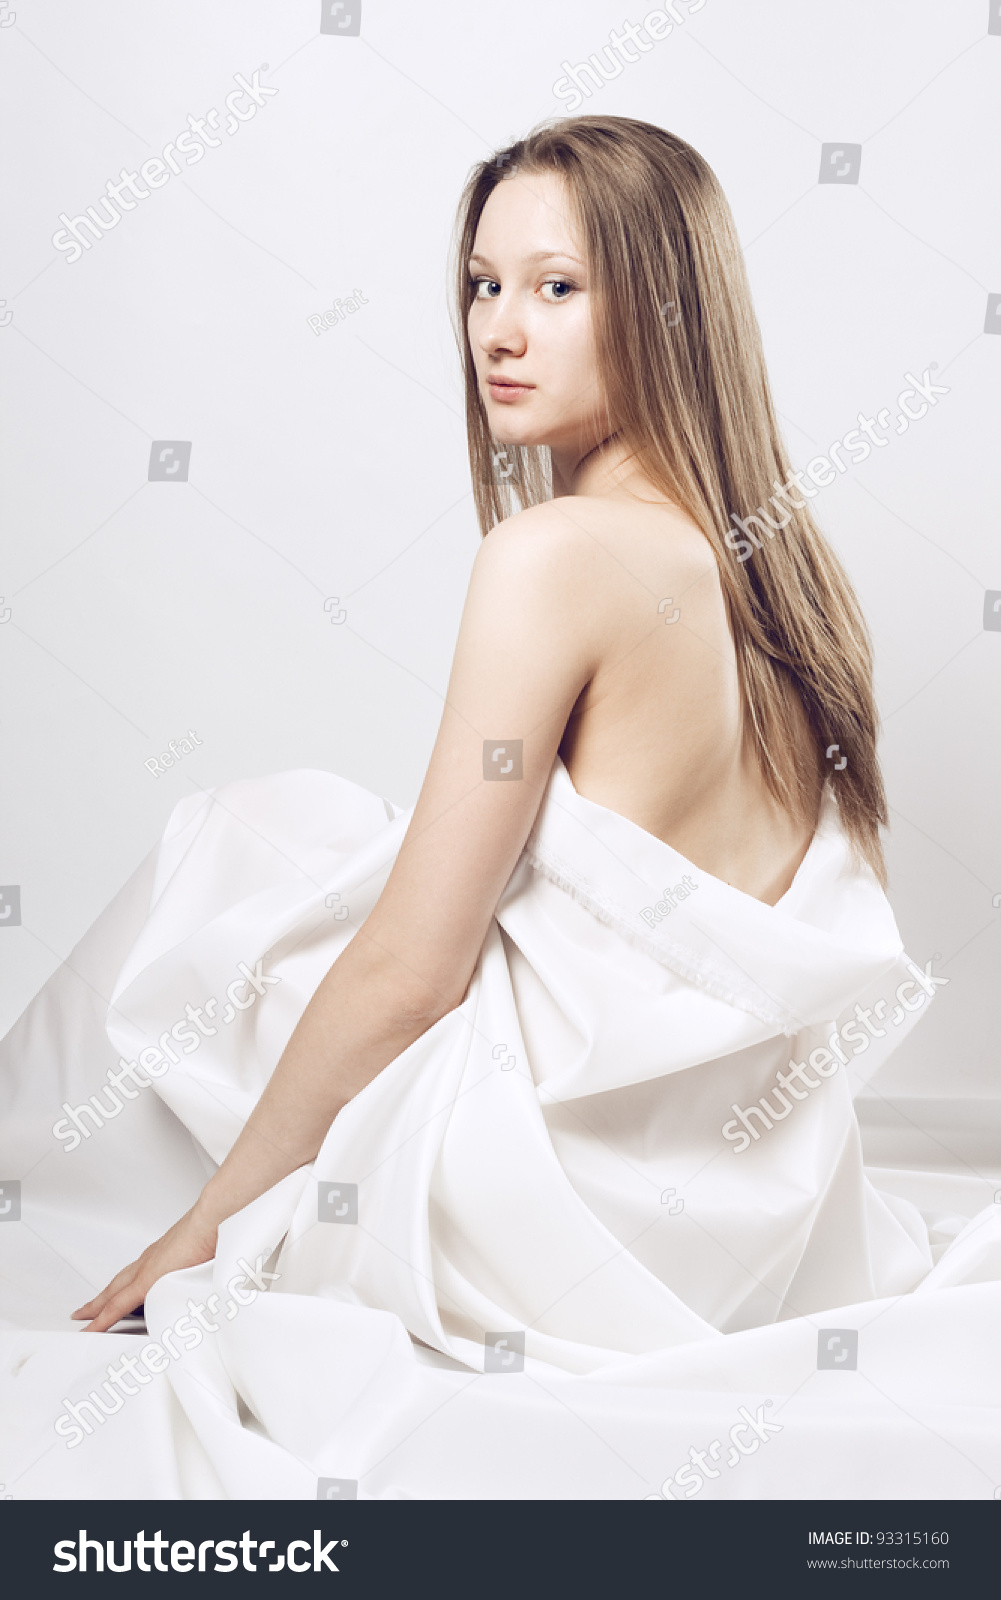 Healthy Naked Woman Over White Stock Photo Shutterstock